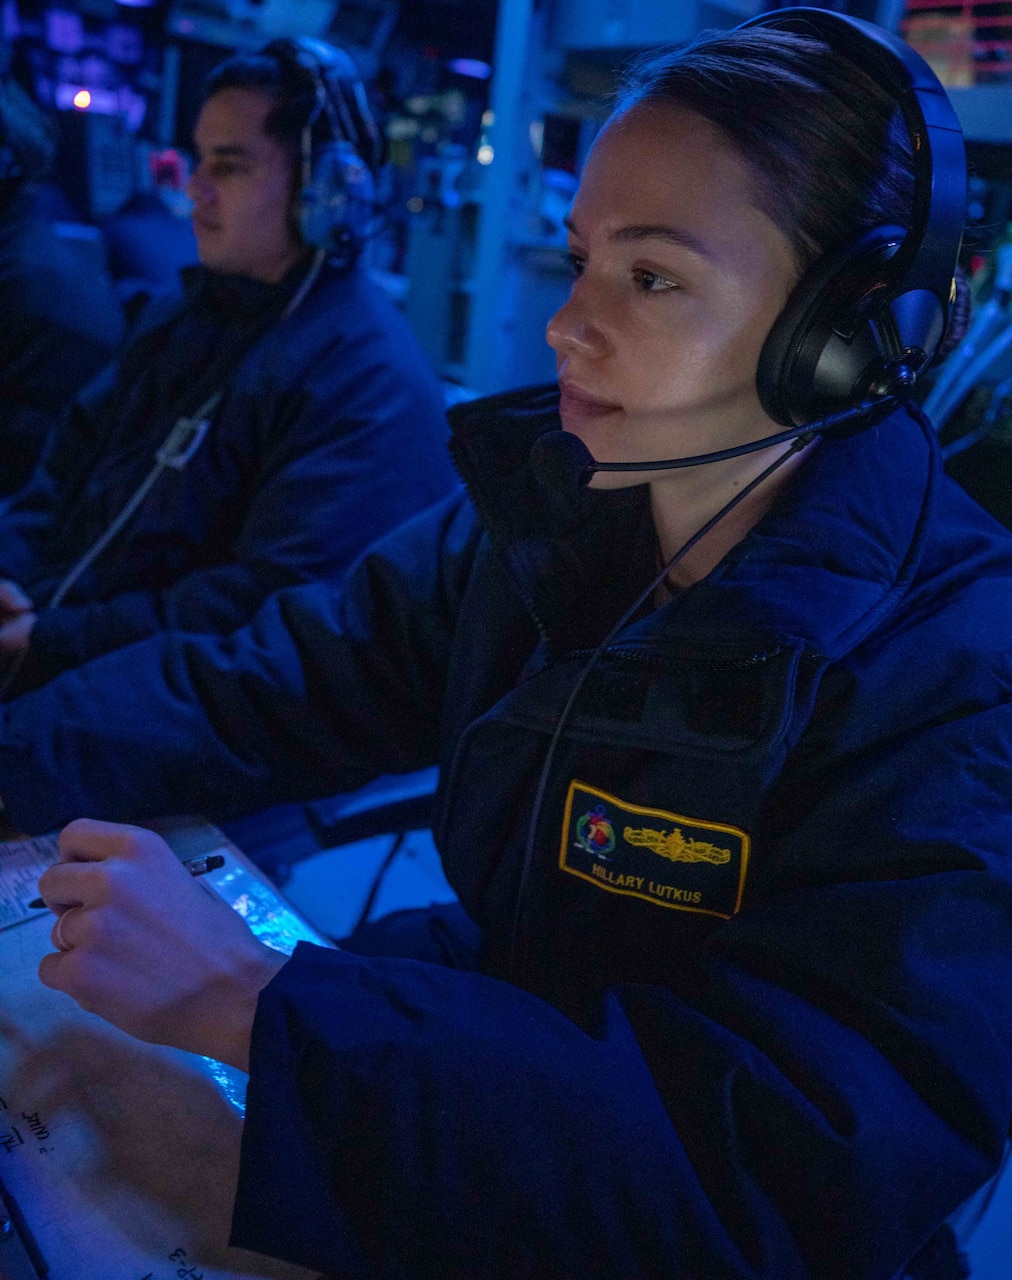 U.S. Navy Lt. Hillary Lutkus tracks and monitors air contacts aboard the Arleigh Burke-class guided-missile destroyer USS Chung-Hoon (DDG 93). Chung-Hoon, part of the Nimitz Carrier Strike Group, is currently underway in 7th Fleet conducting routine operations. 7th Fleet is the U.S. Navy's largest forward-deployed numbered fleet, and routinely interacts and operates with 35 maritime nations in preserving a free and open Indo-Pacific region.